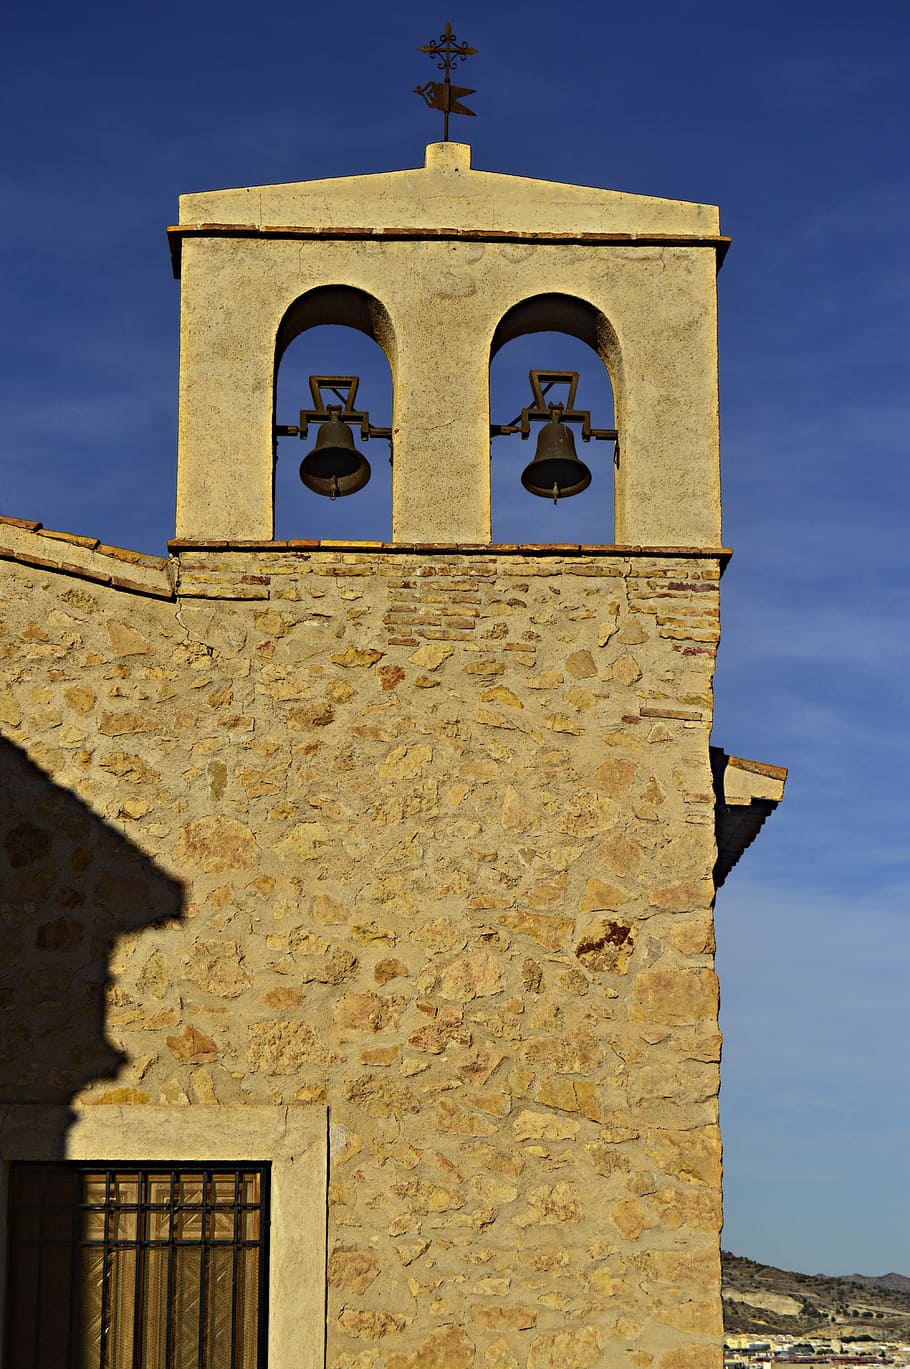 bell tower, campaigns, hermitage, tower, architecture, spain, catholic religion, faith, christianity, built structure